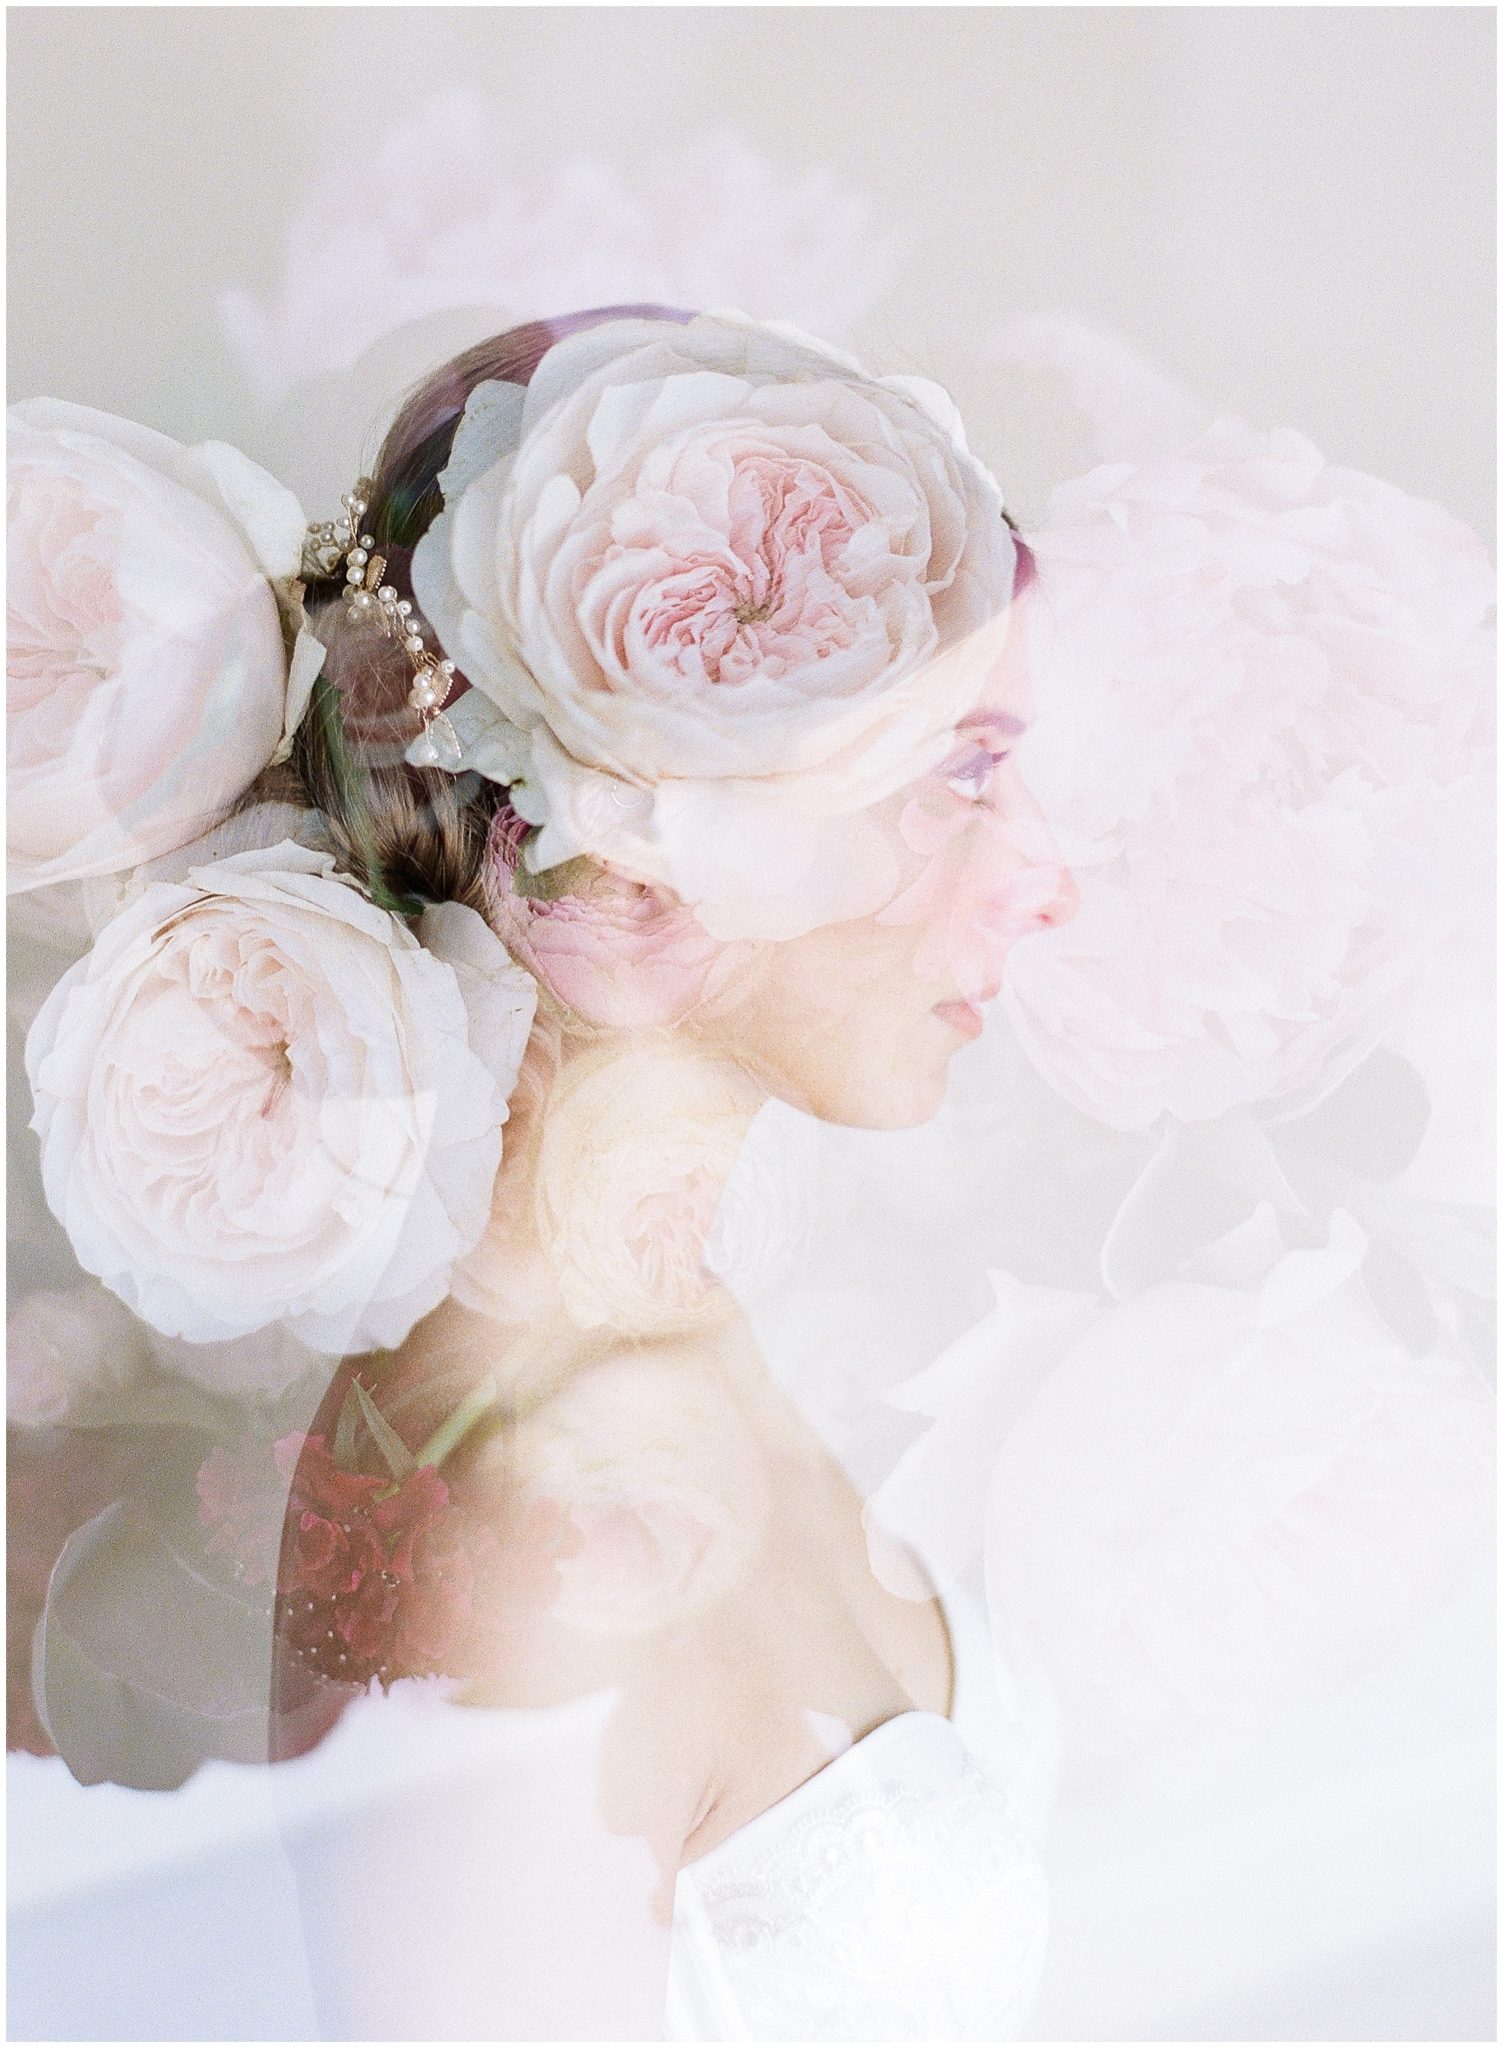 bridal boudoir session photographed by Alexandra Vonk